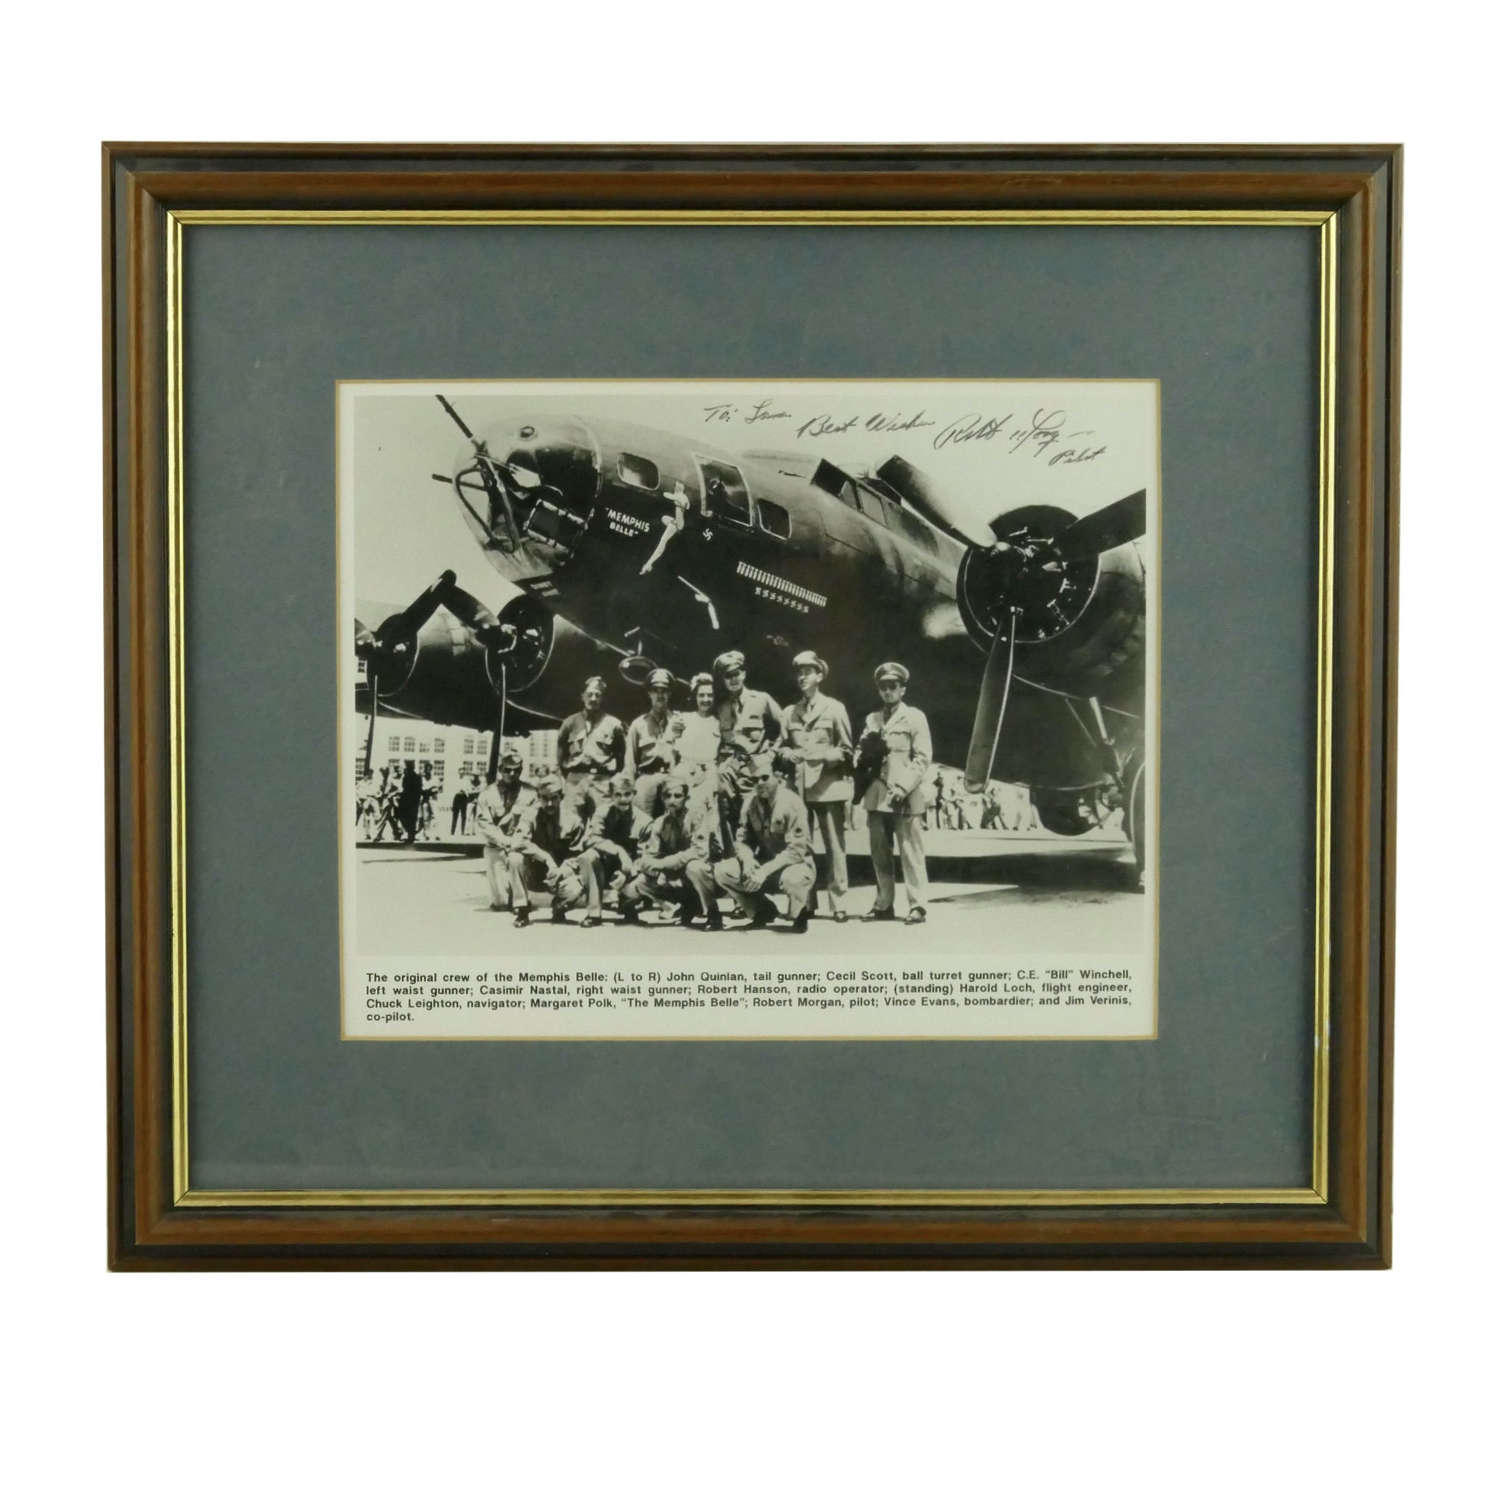 Photo of the Memphis Belle - signed by the pilot